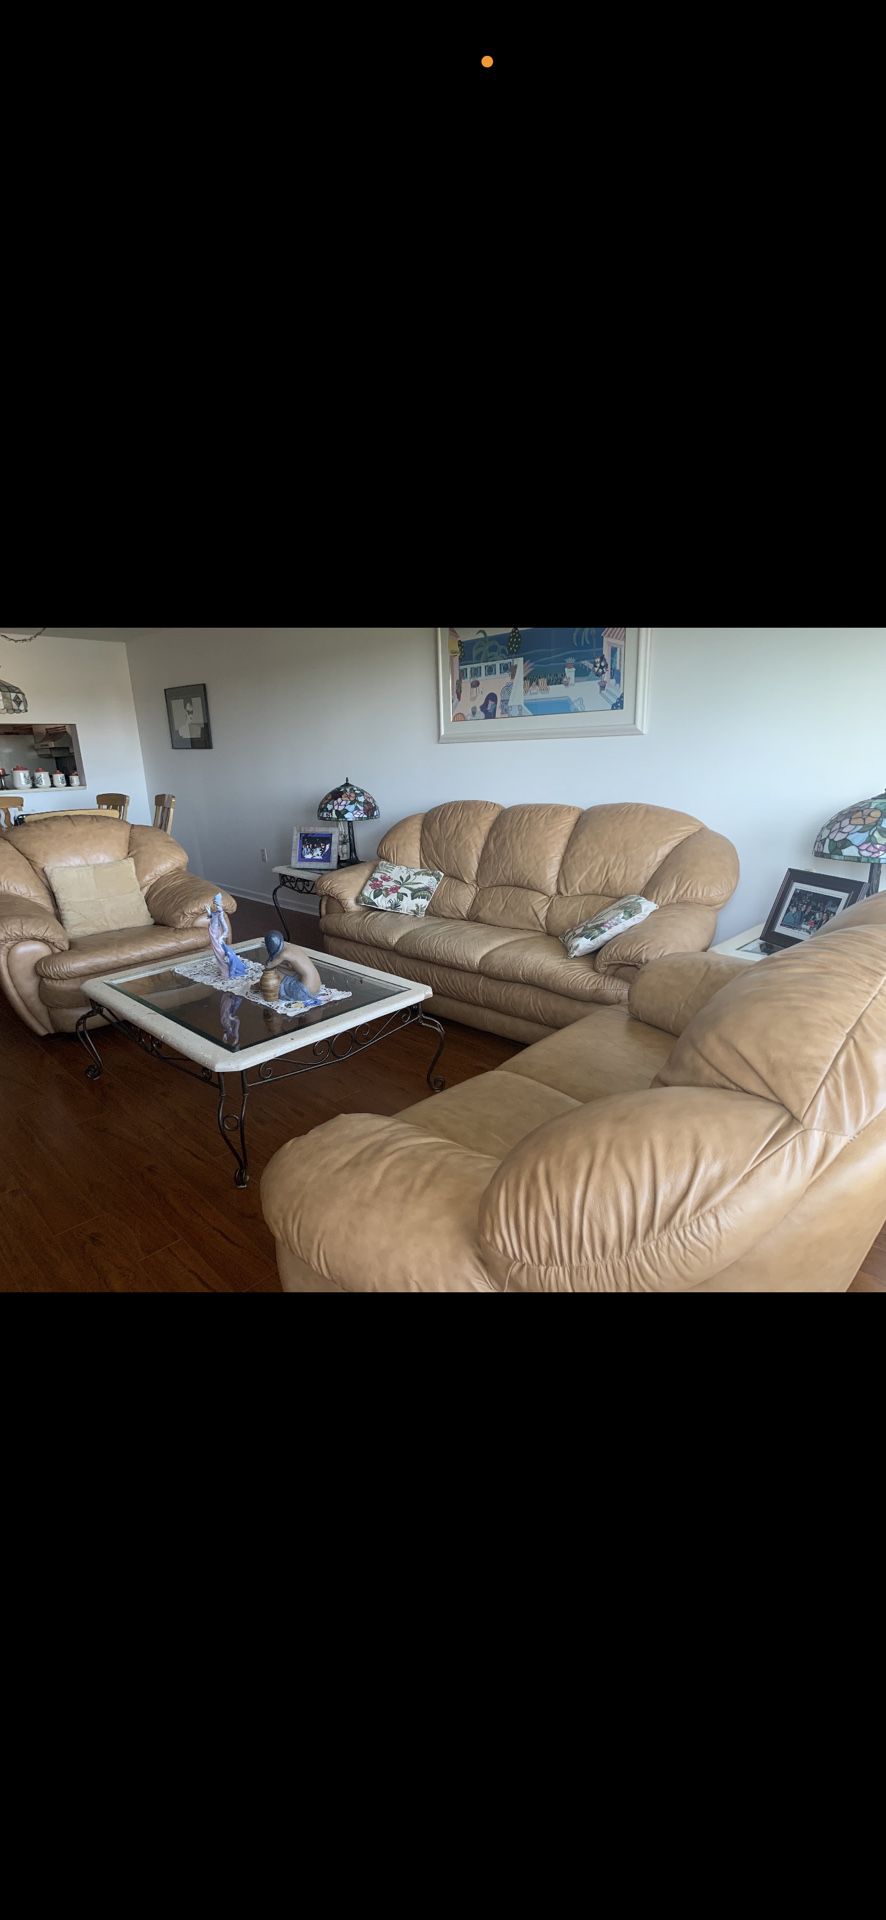 Full living Room Set - Leather Sofa Set And More 